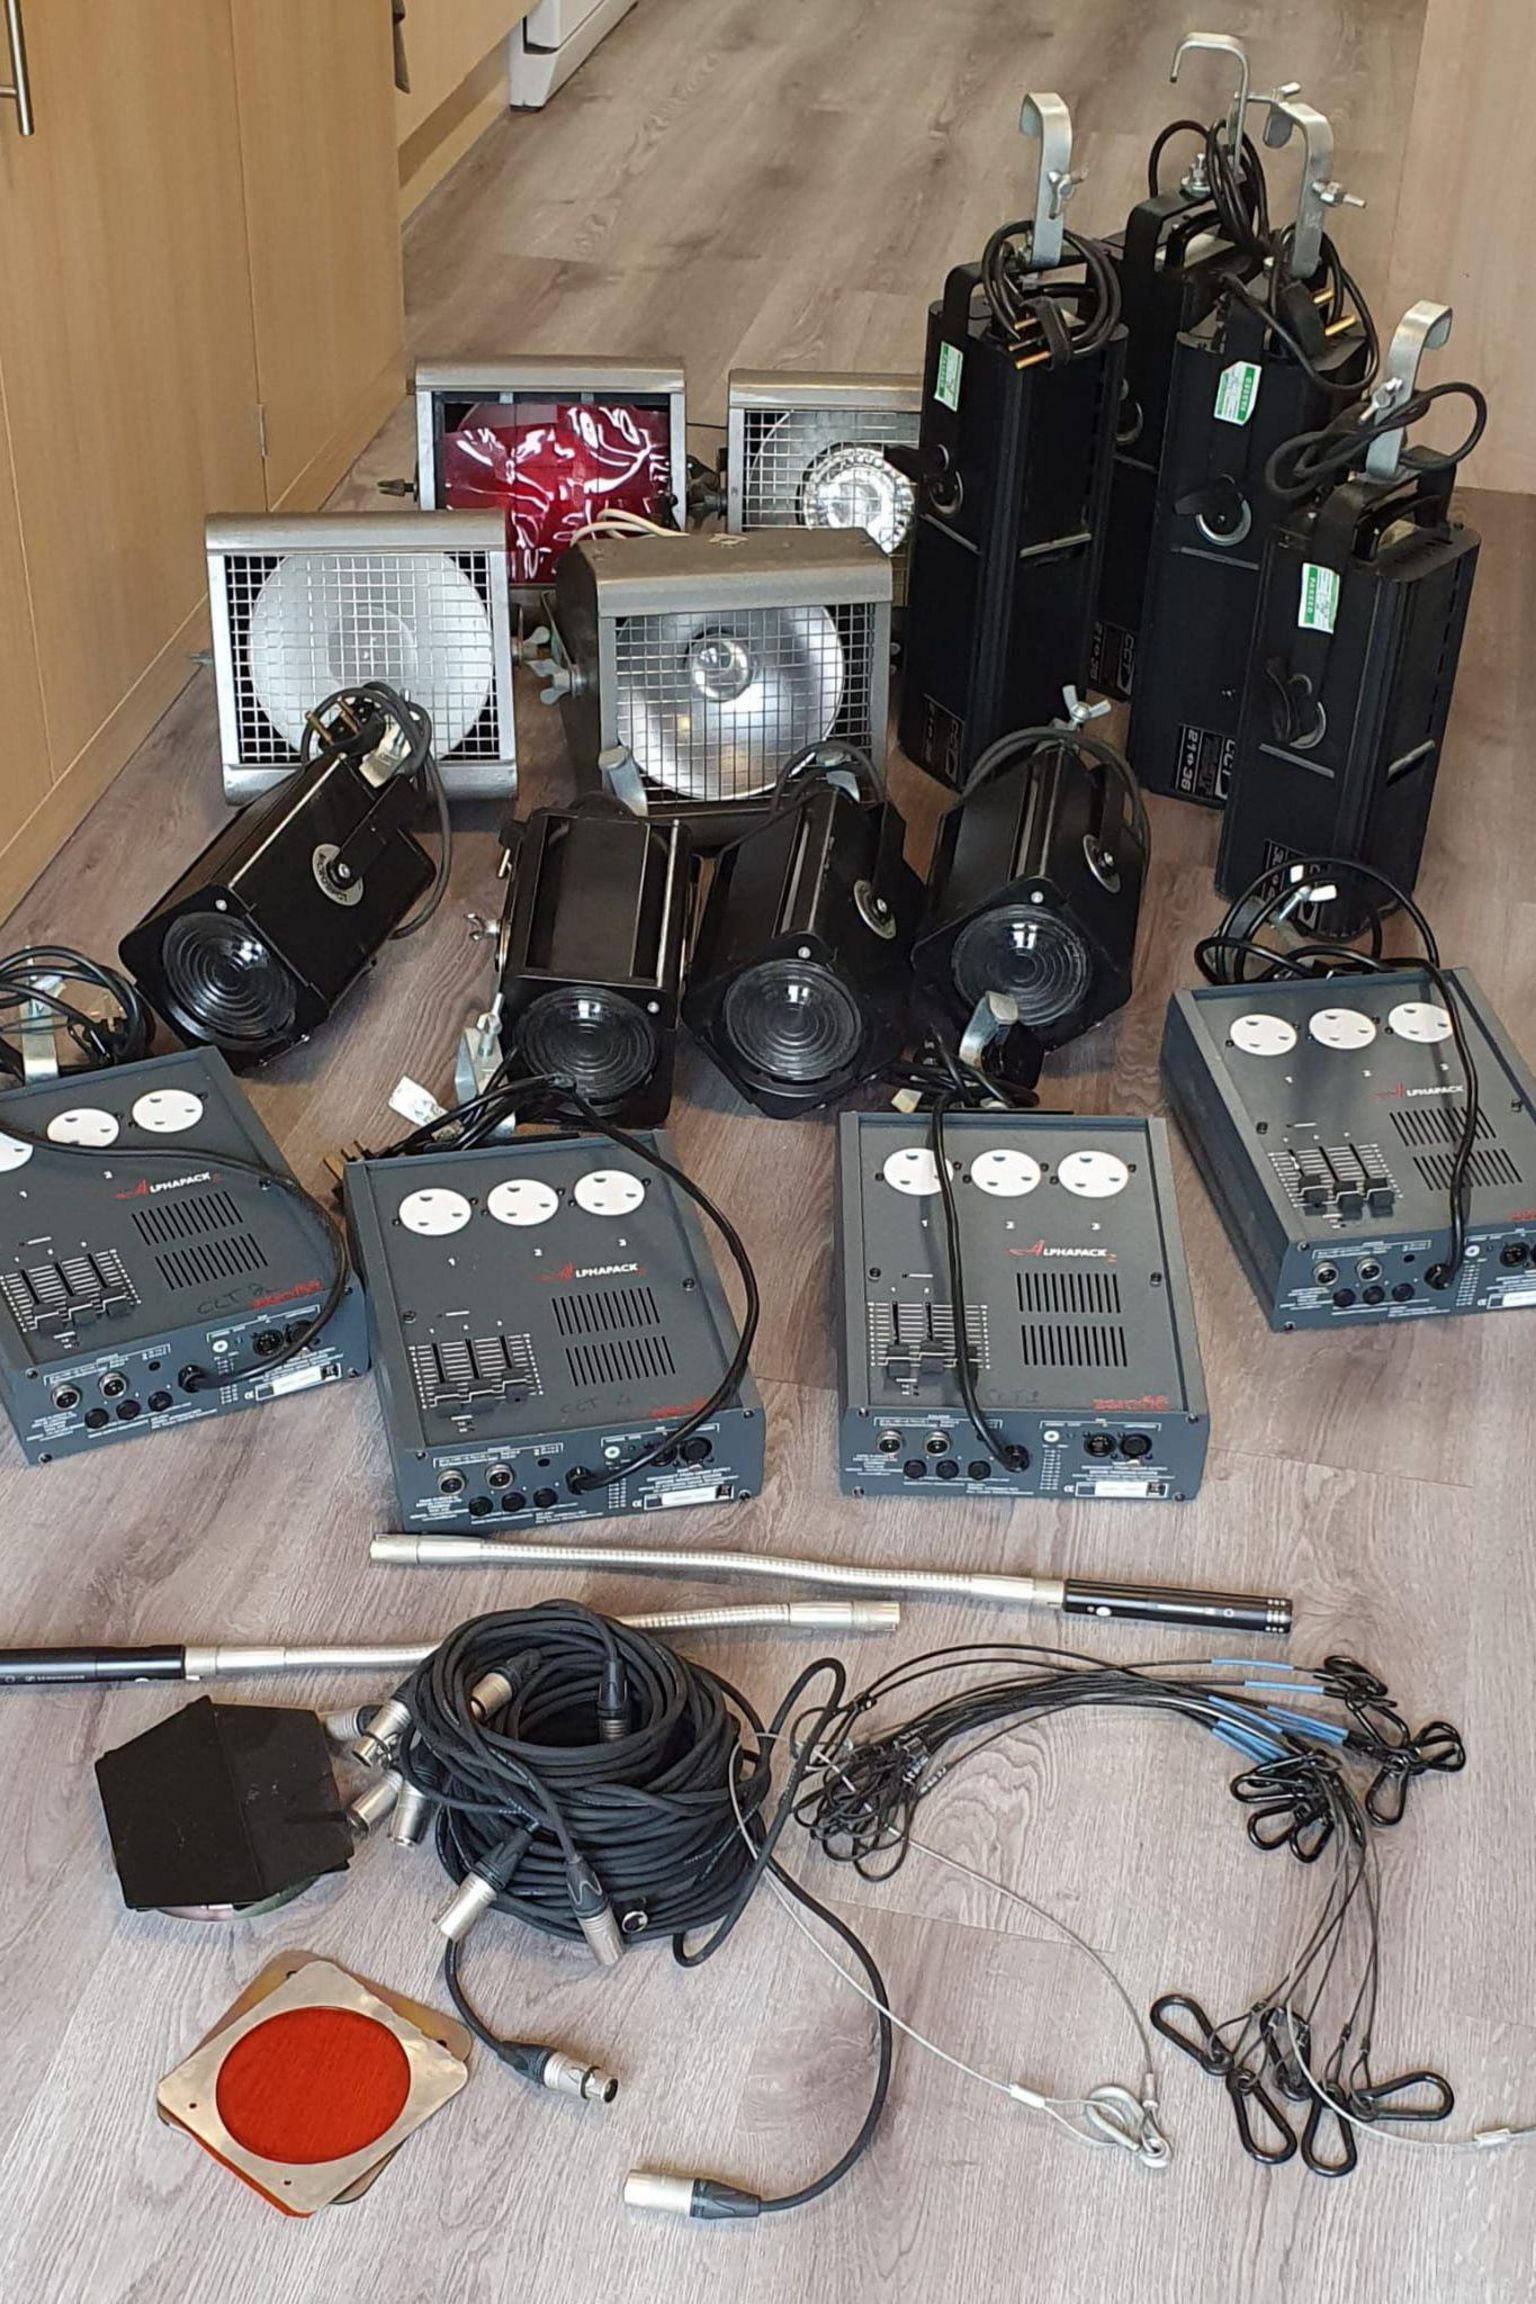 Lighting, cables and other technical equipment used for production